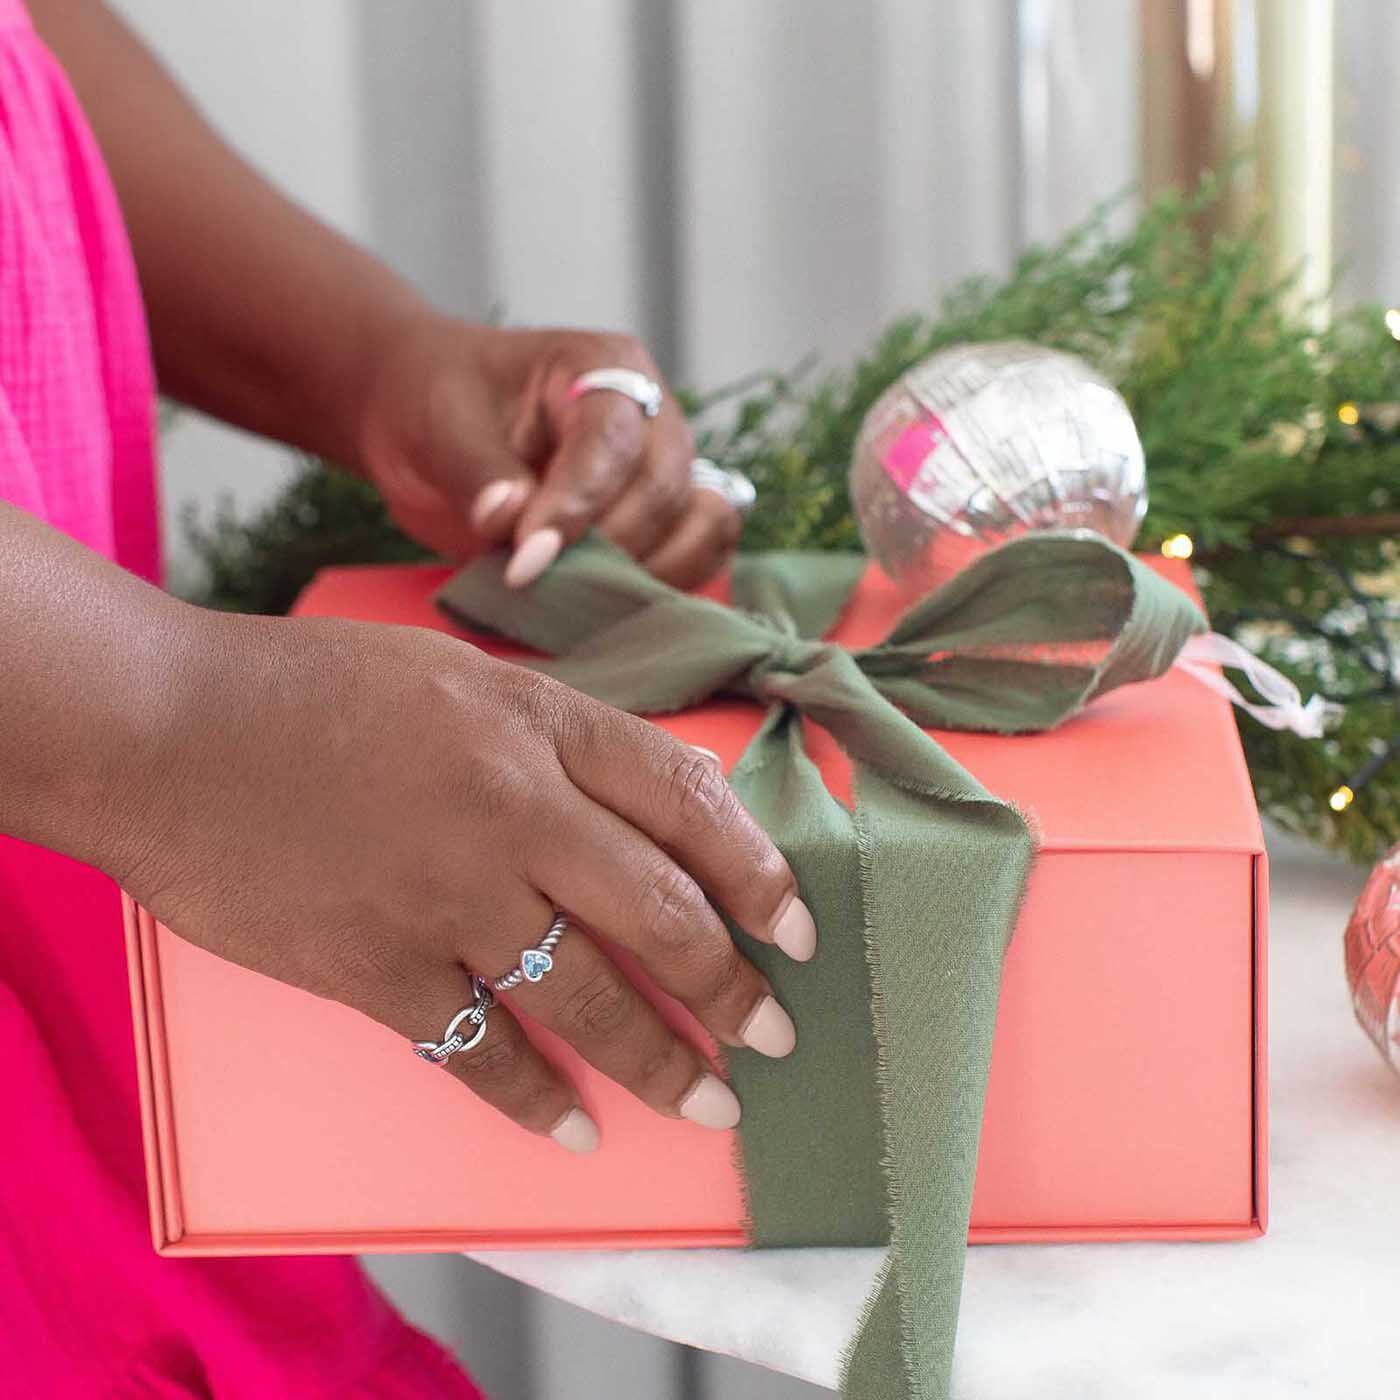 Model wearing sterling silver rings holding a coral gift box with green ribbon